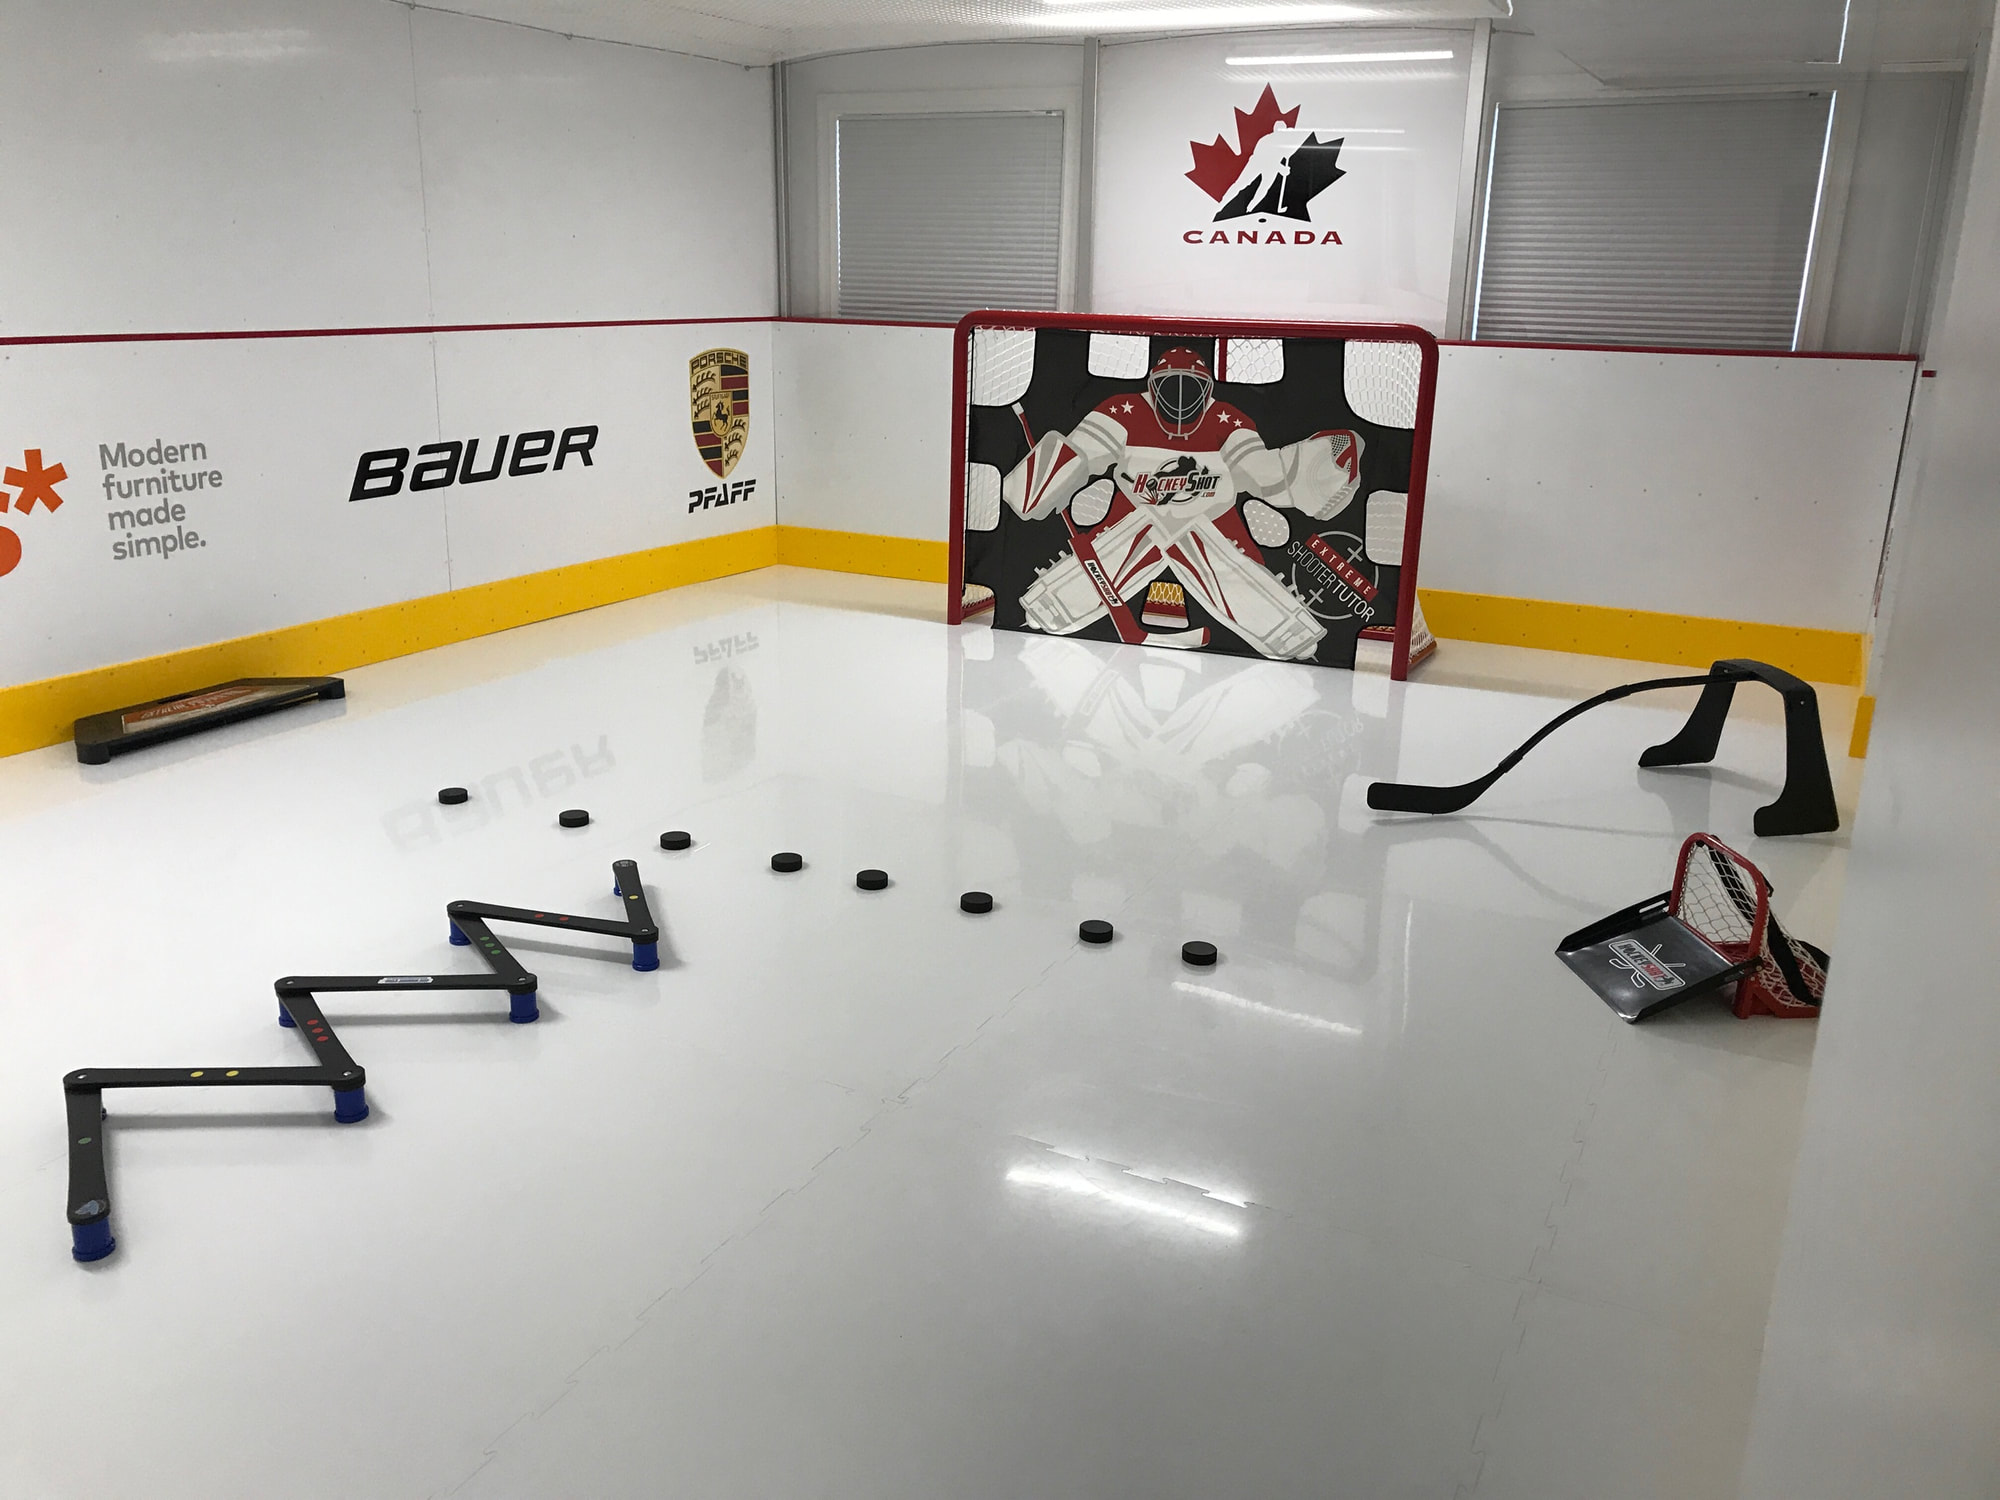 Basement Hockey Rink with Synthetic Ice